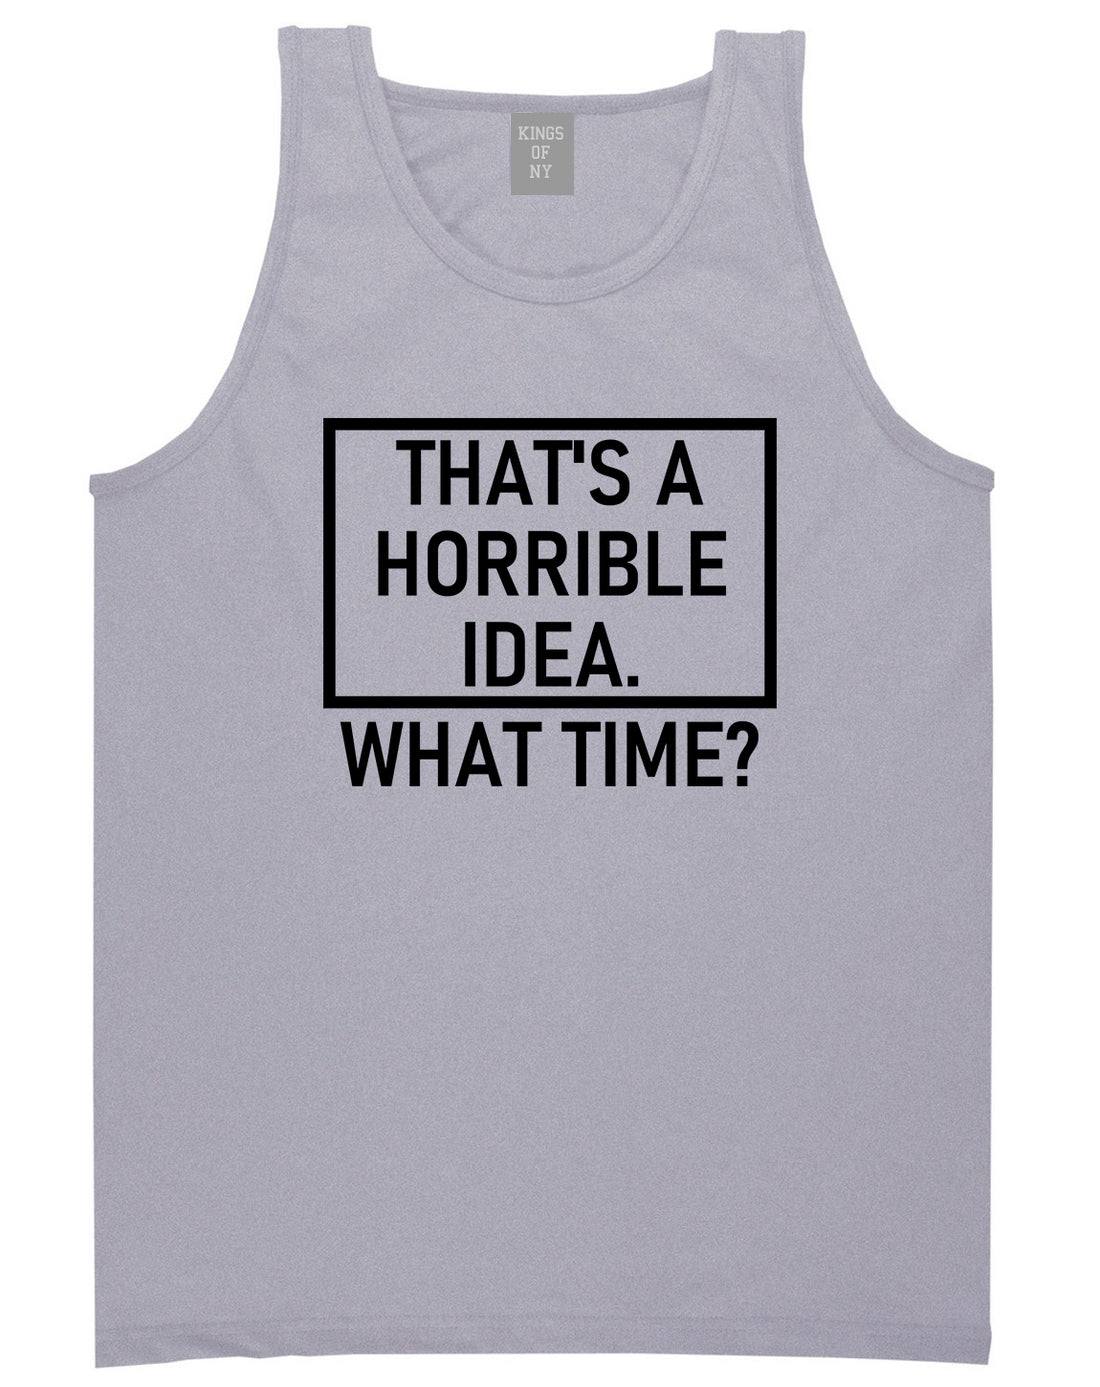 Thats A Horrible Idea What Time Funny Mens Tank Top T-Shirt Grey